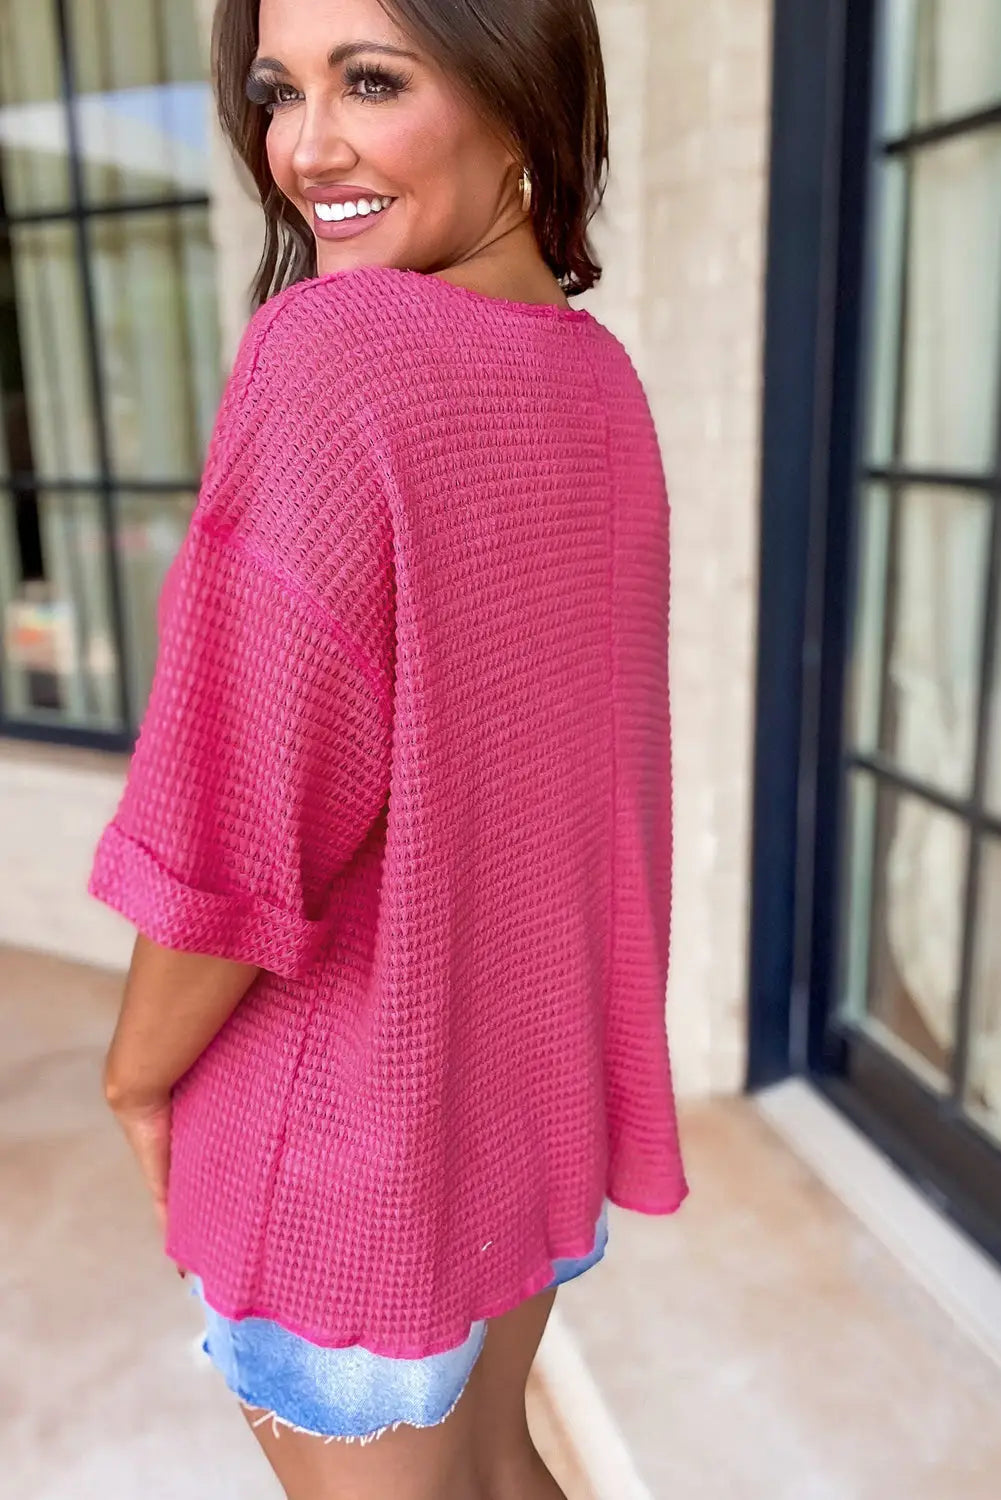 Strawberry pink textured knit split neck cuffed short sleeve top - tops